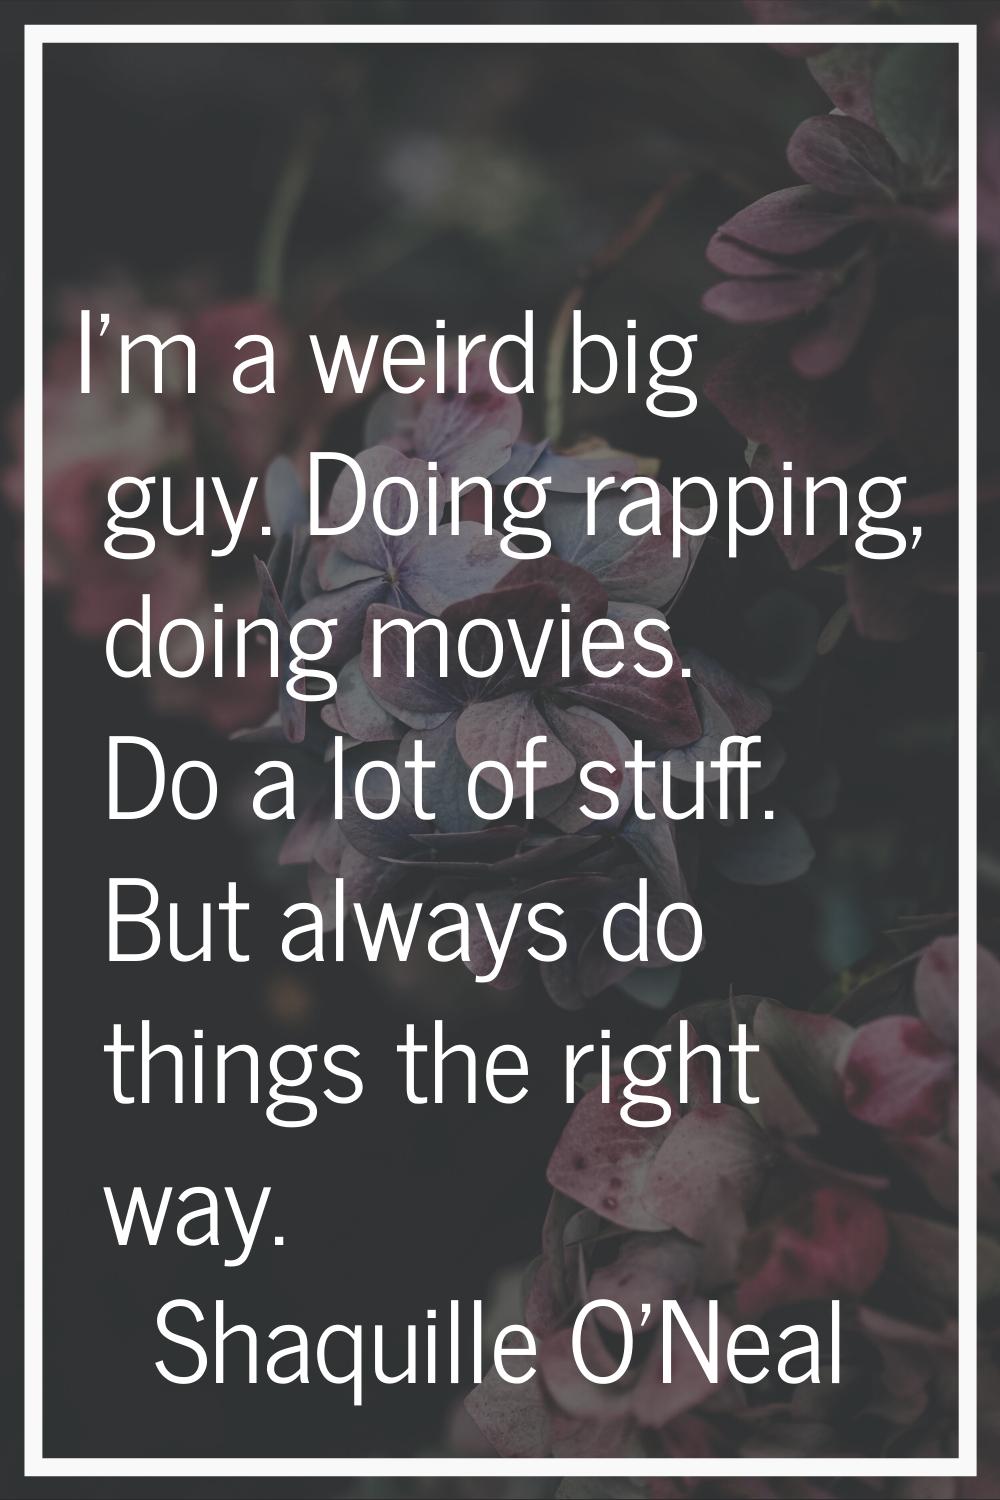 I'm a weird big guy. Doing rapping, doing movies. Do a lot of stuff. But always do things the right